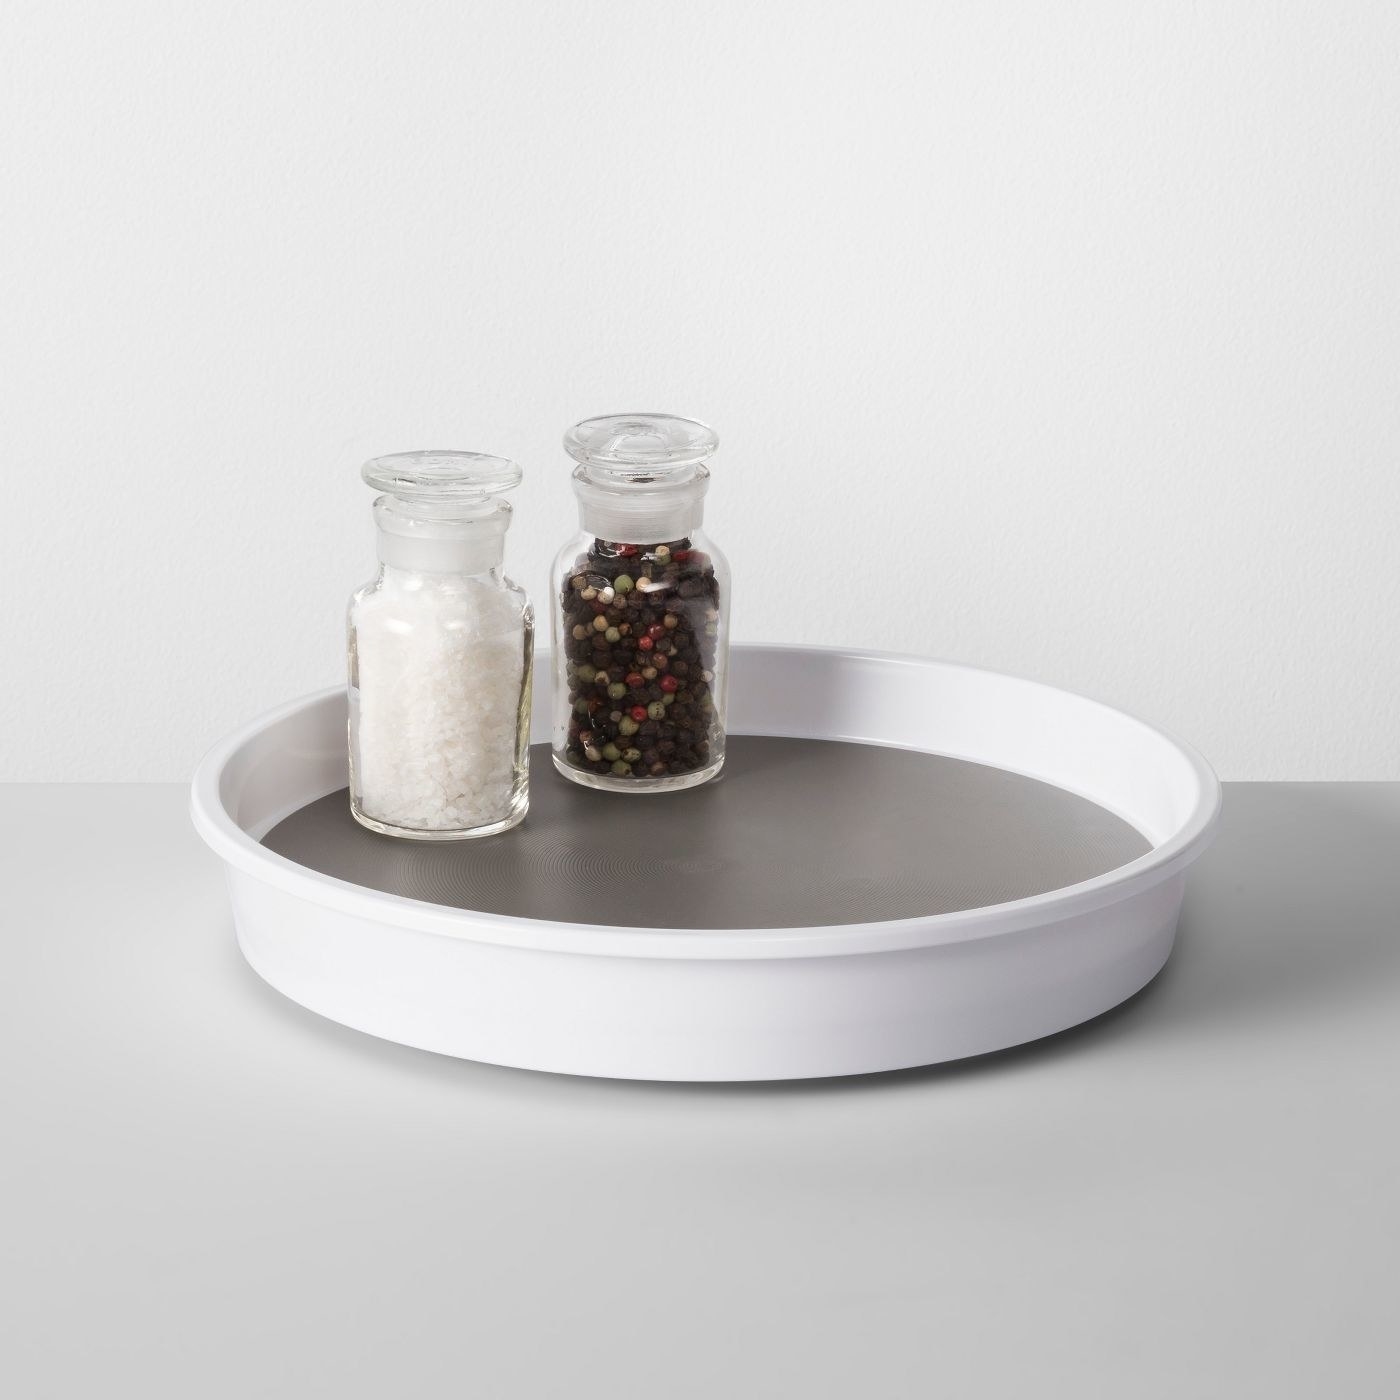 A white kitchen cabinet turntable with salt and pepper shaker on it